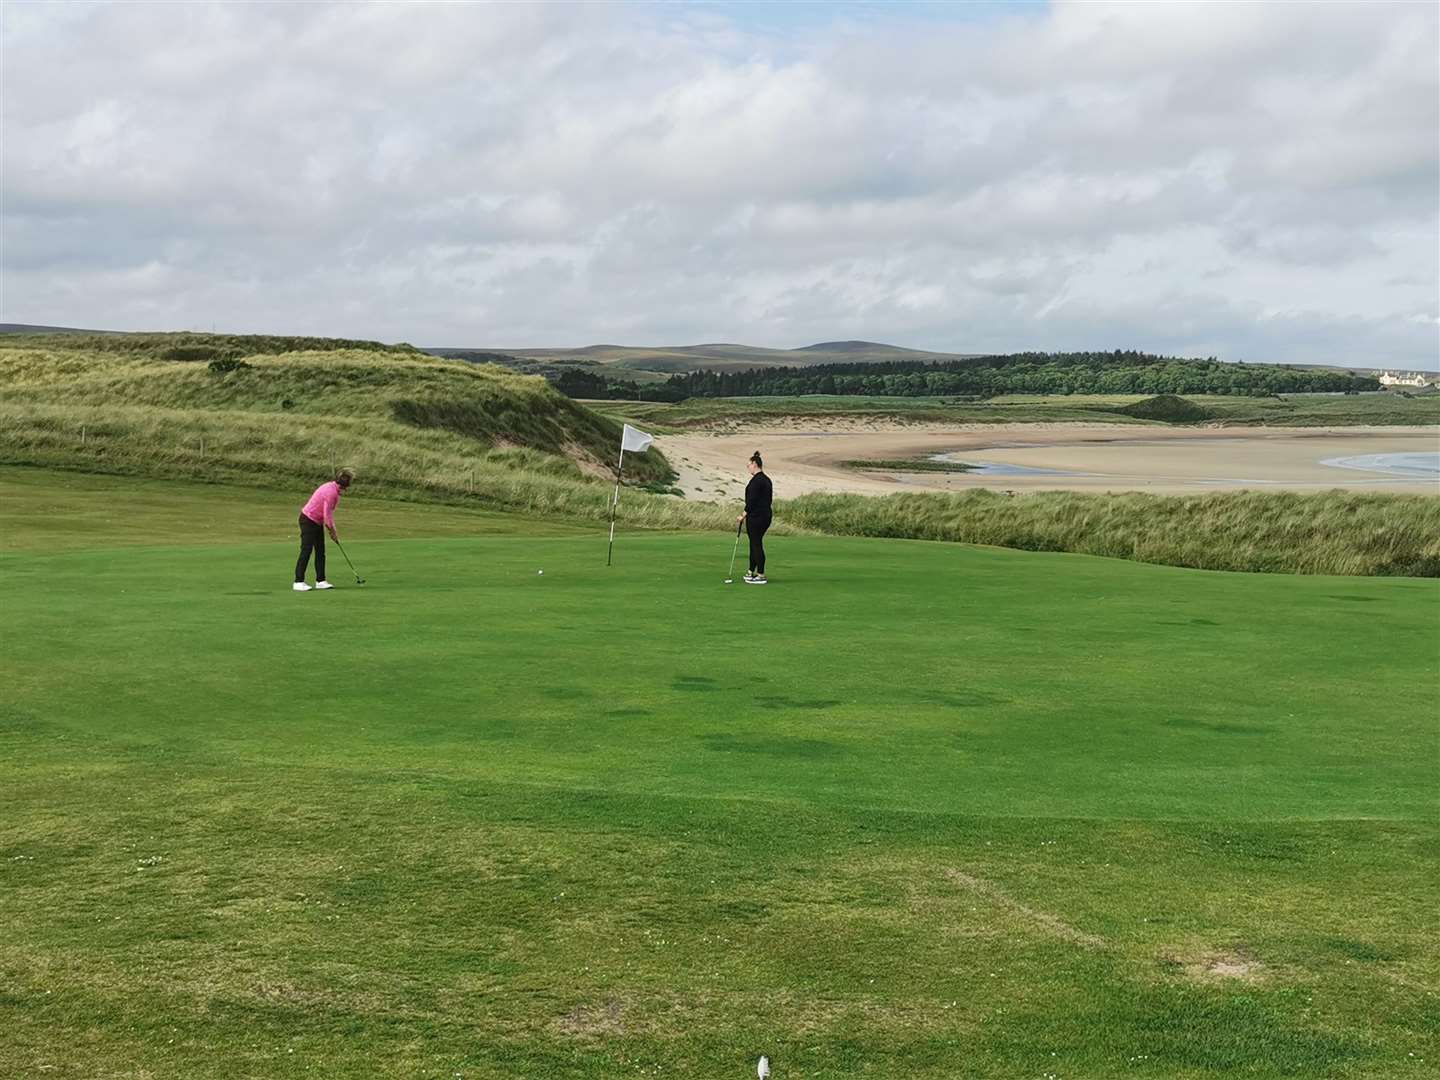 Alison Ross (left) putting at the 9th hole while her playing partner Sarah Meiklejohn looks on.